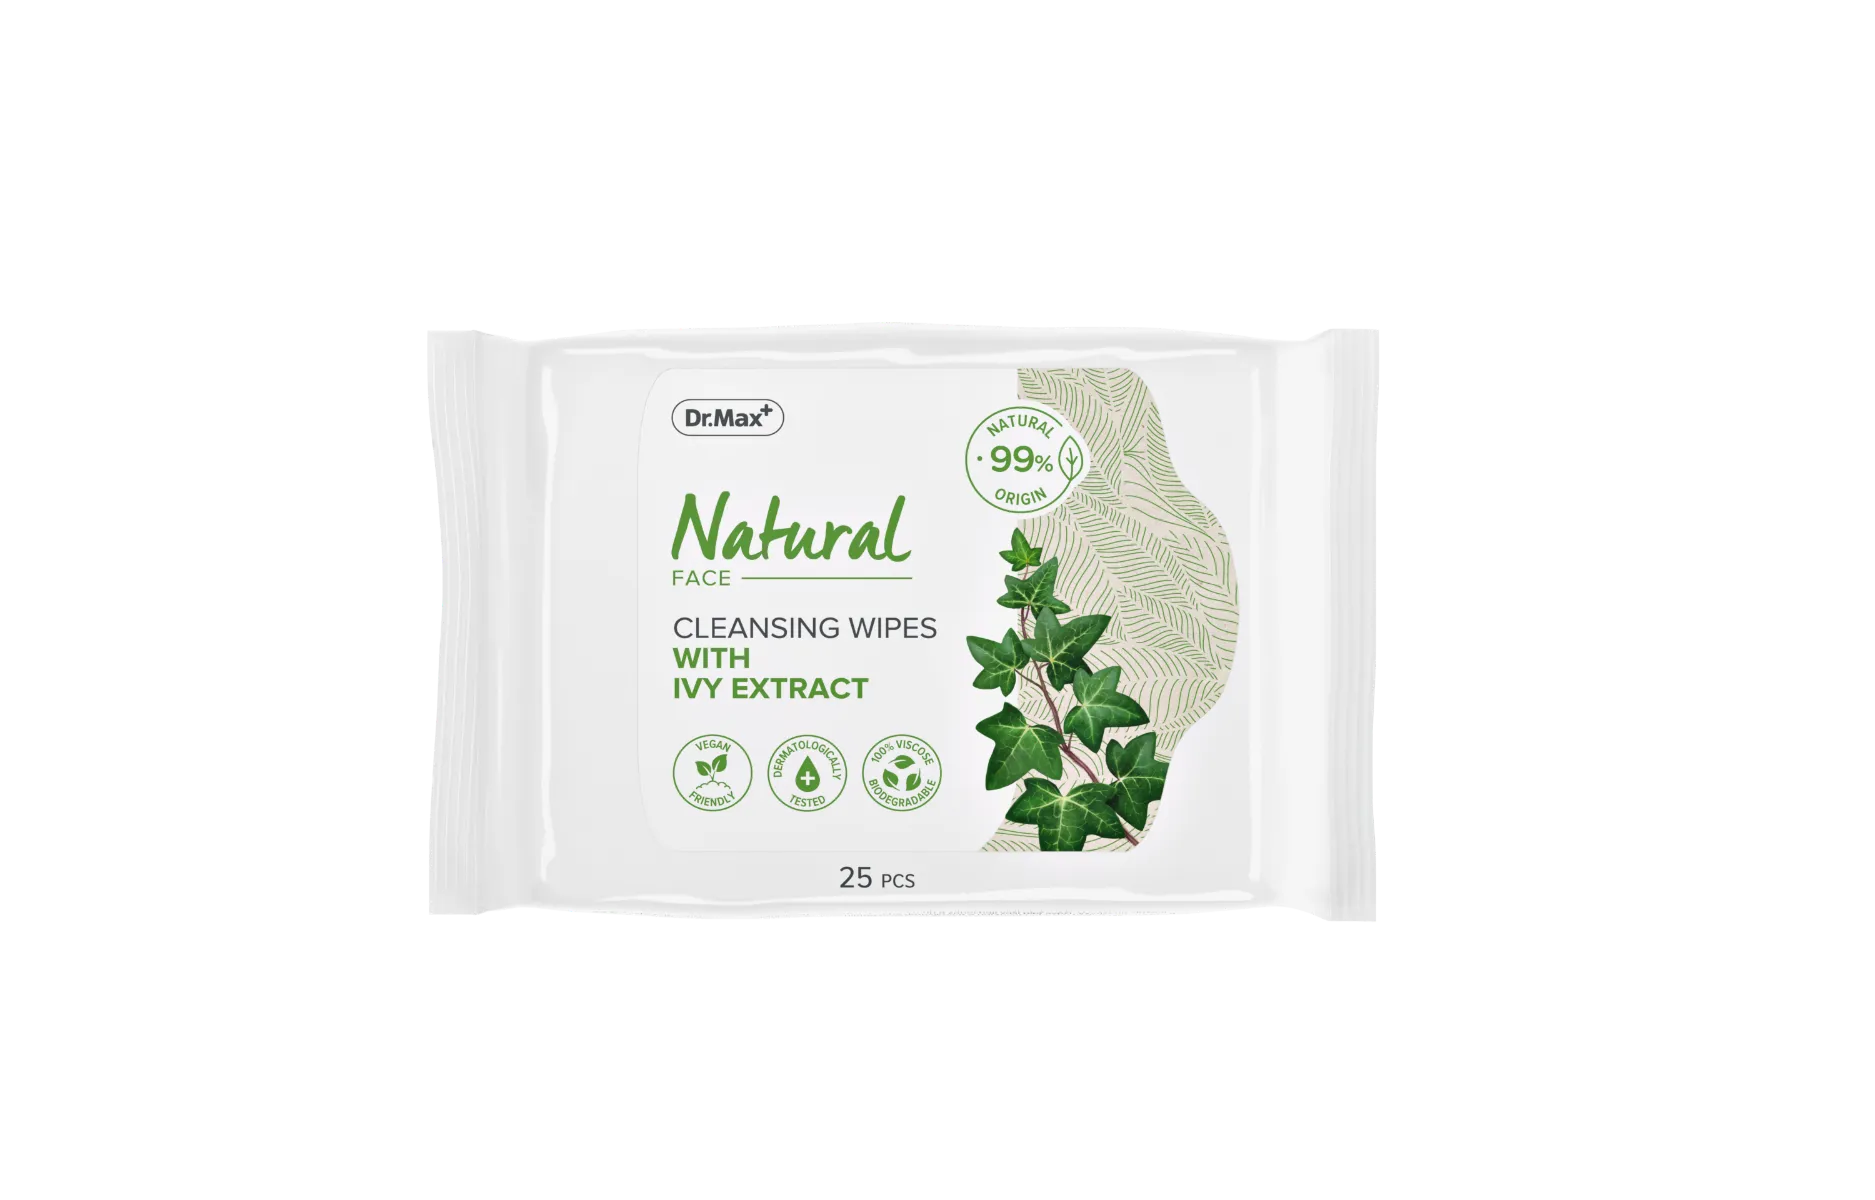 Dr.Max Natural Cleansing Wipes with Ivy Extract 25 Pezzi Salviettine Struccanti Per Tutti i tipi di Pelle